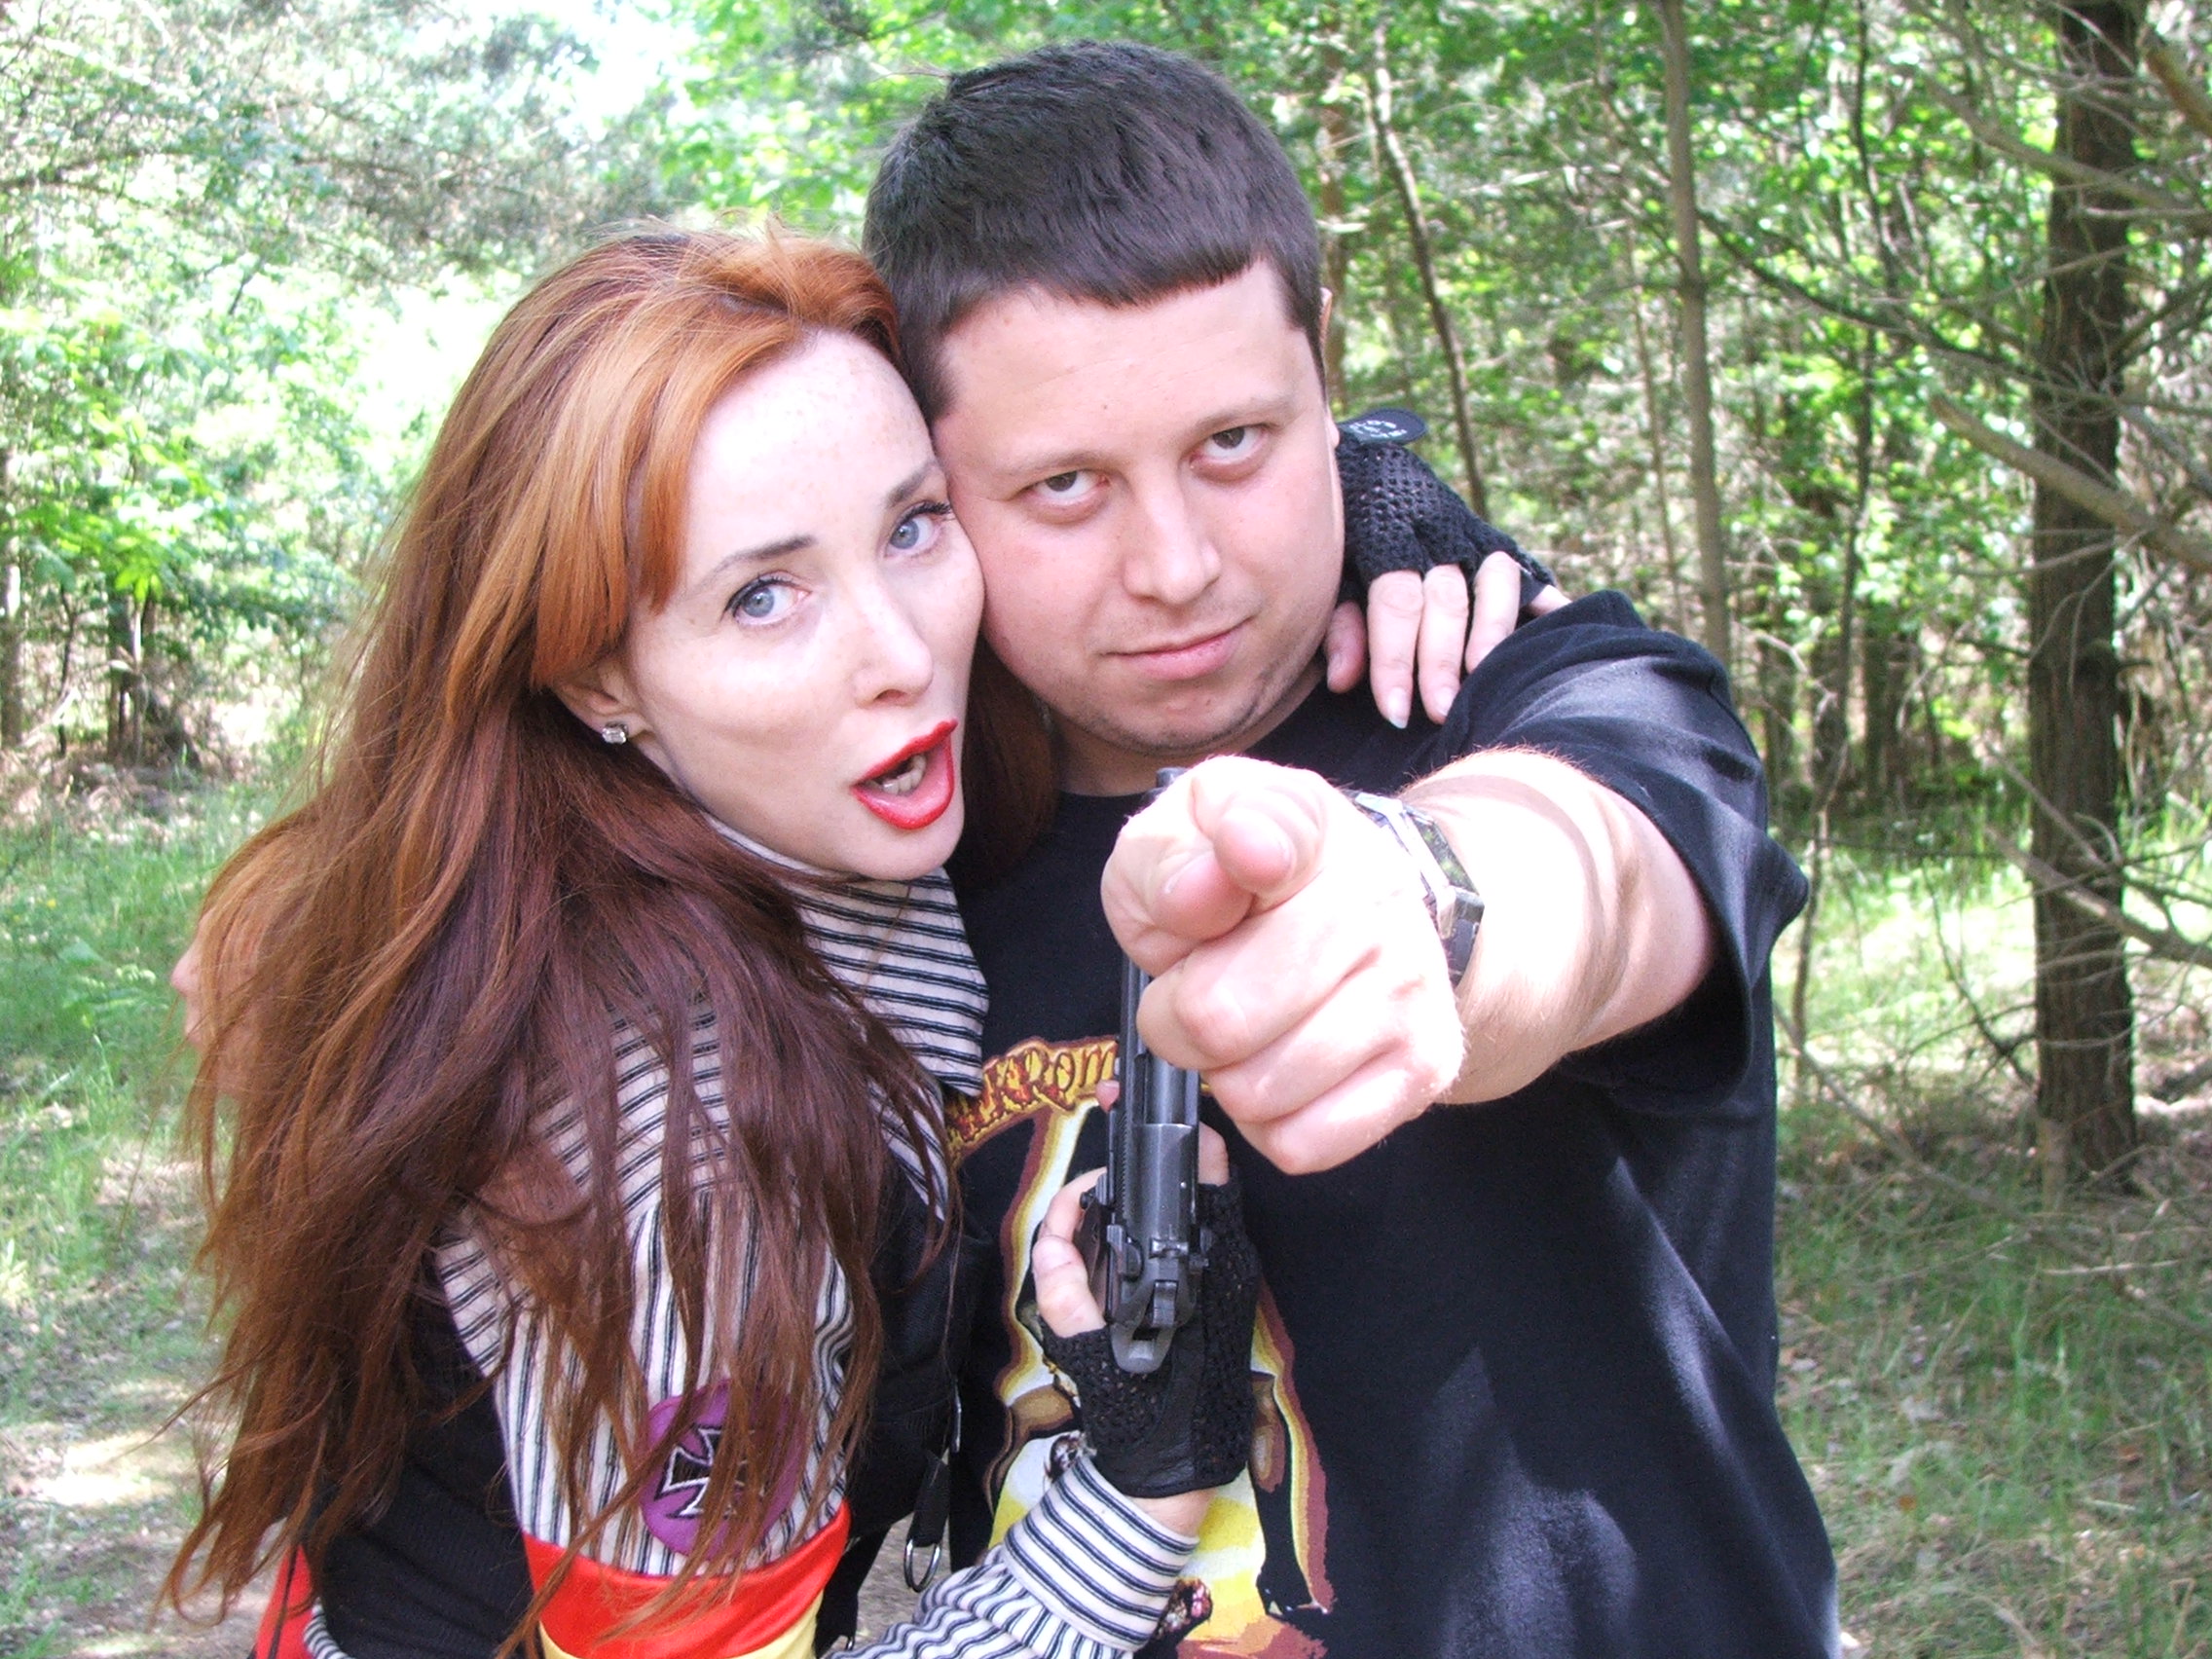 Jason Impey with Eileen Daly while shooting his feature film The Turning aka Zombie Lover